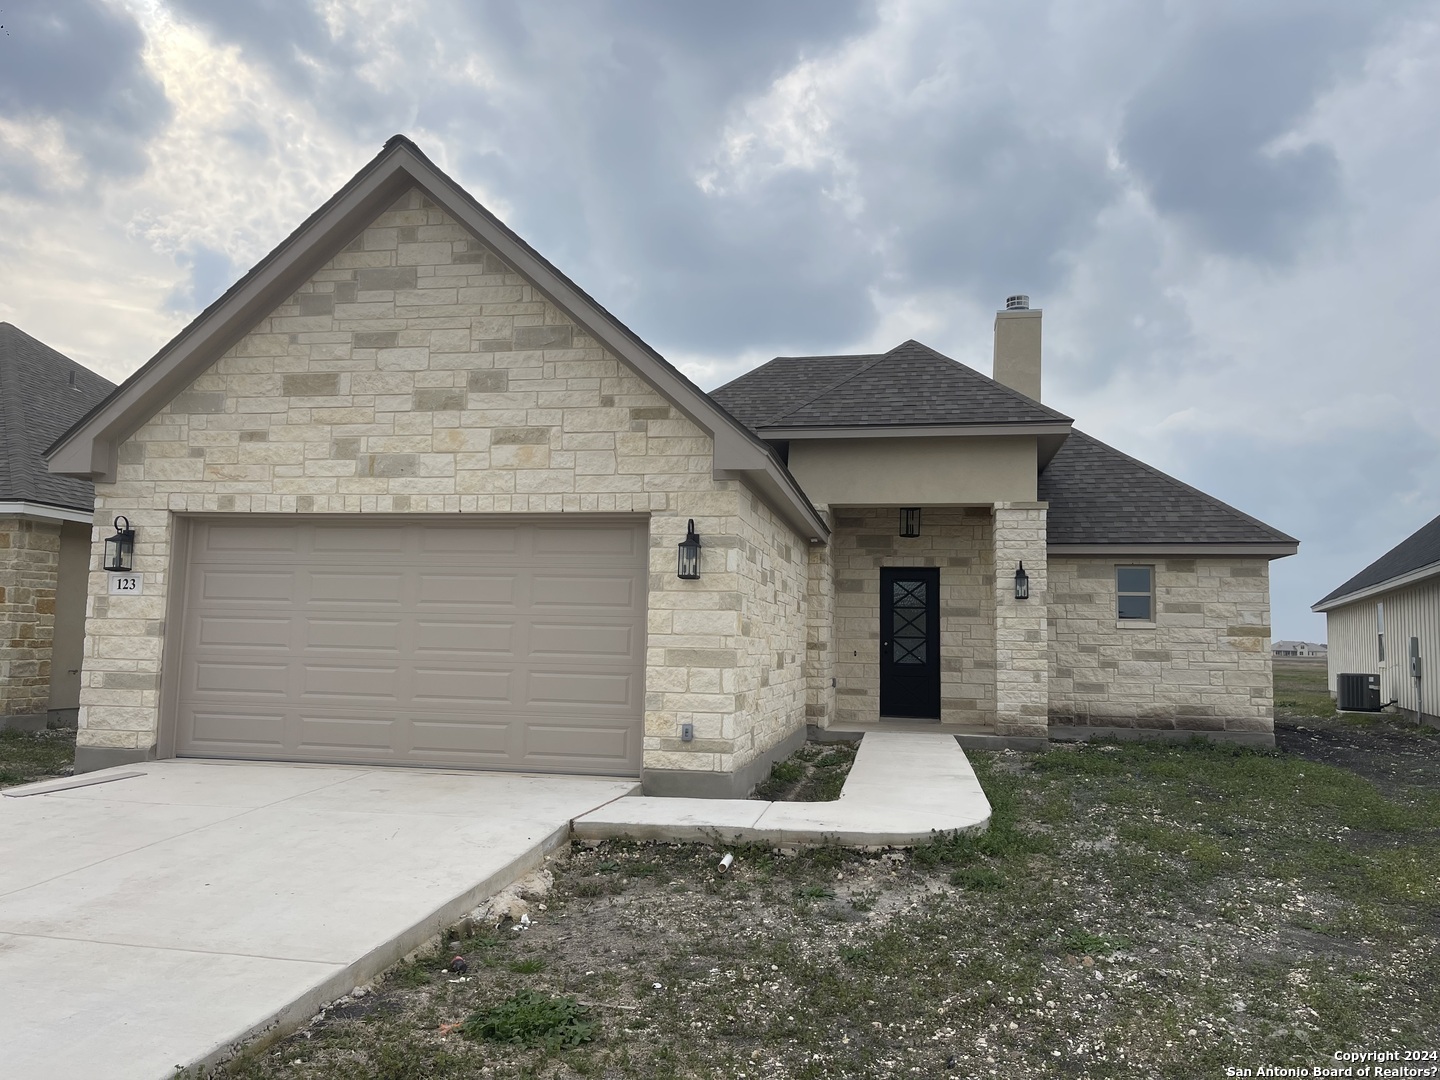 Photo of 123 John T Ct in Castroville, TX